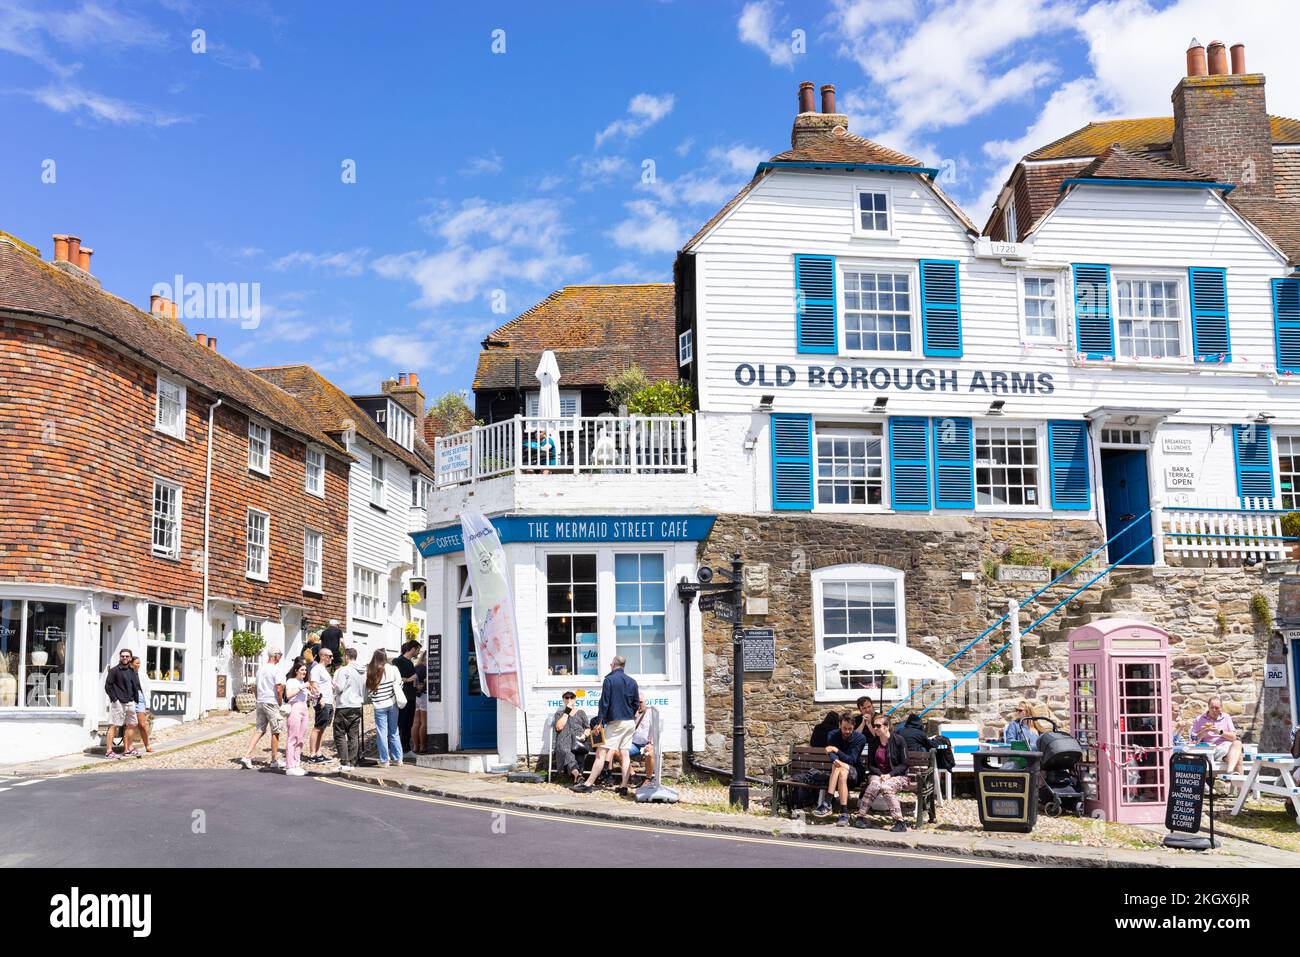 Rye East Sussex Rye the Old Borough Arms Inn and hotel and the Mermaid street cafe on the Strand Rye Sussex England UK GB Europe Stock Photo